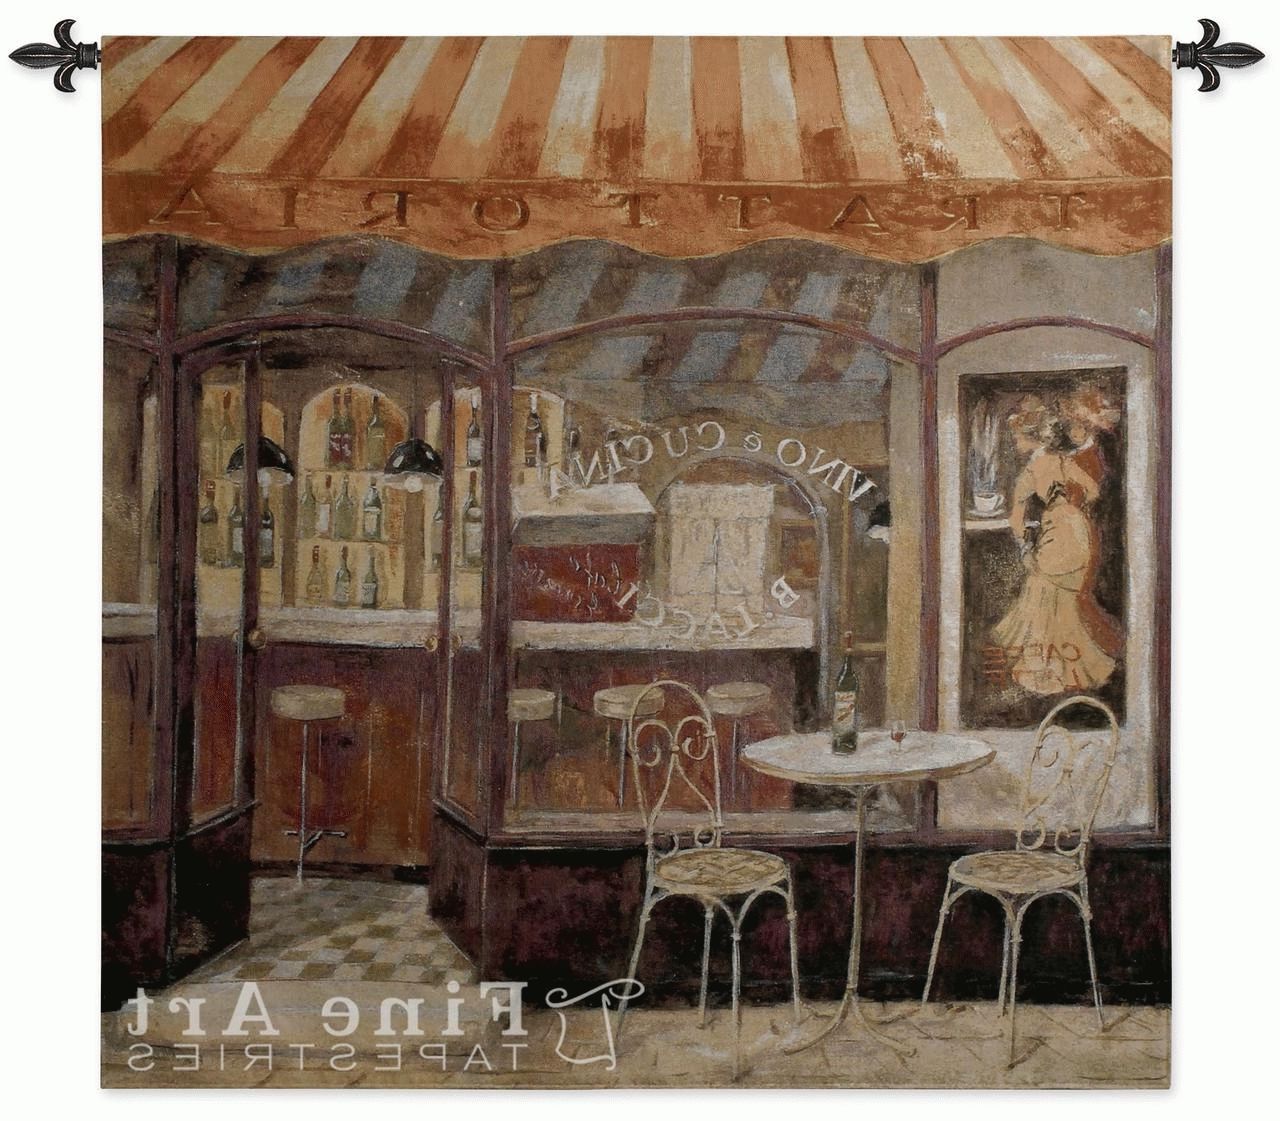 Italian Cafe Tapestry Wall Hanging – City Stret Scene, H53" X W53" For Most Popular Italian Cafe Wall Art (View 2 of 15)